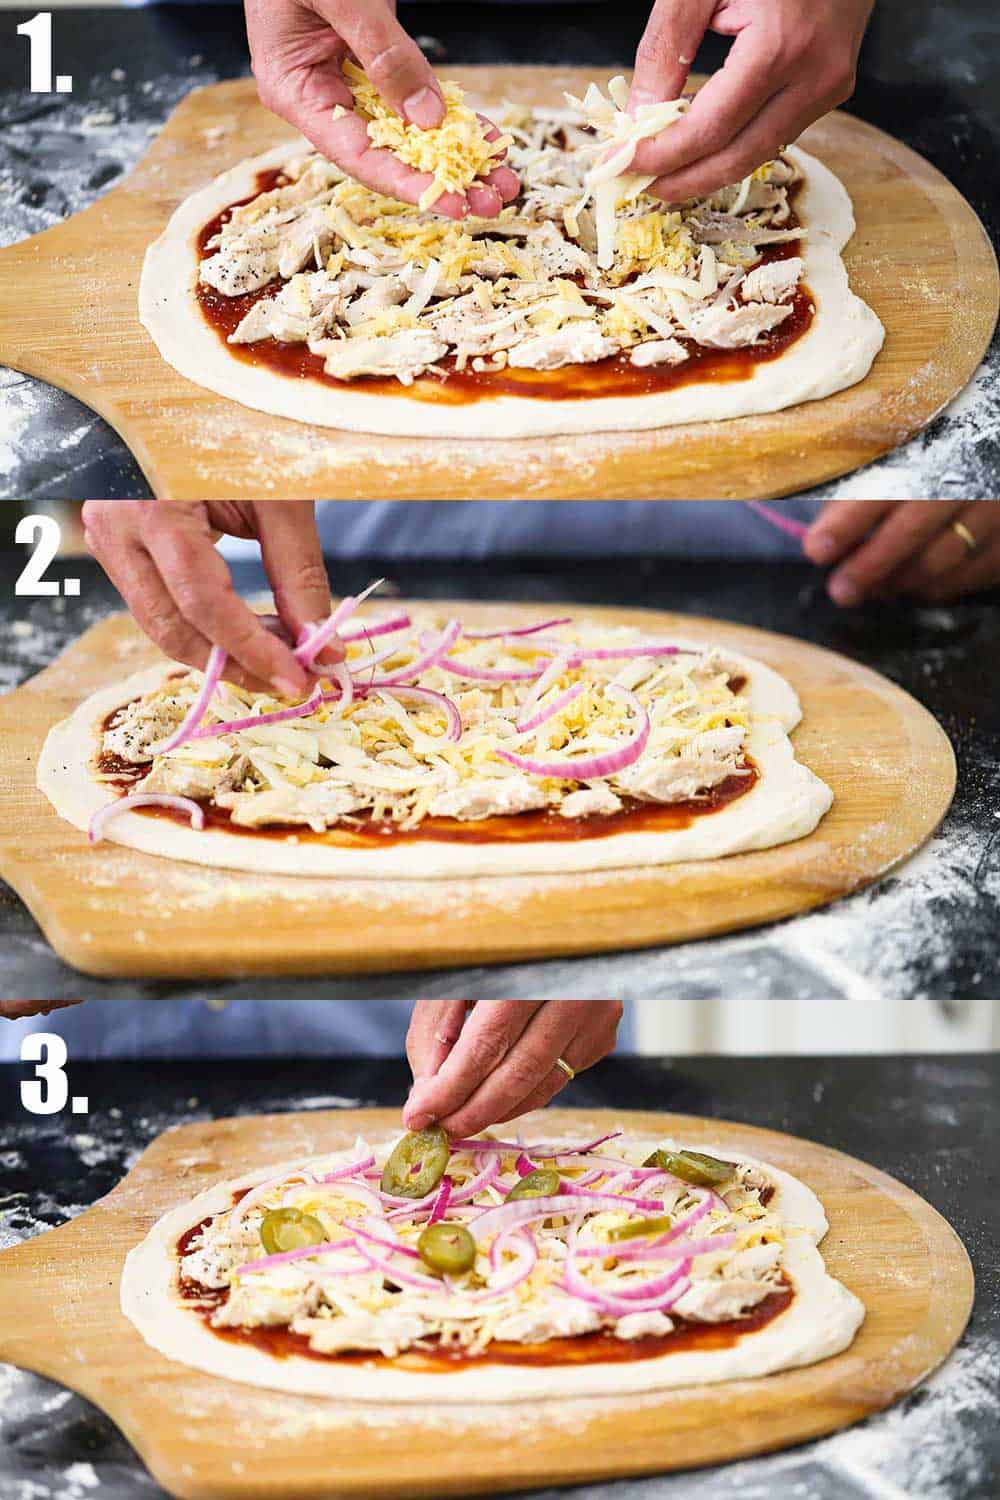 3 stacked images with the top being two hands sprinkling cheese onto a pizza on a pizza paddle, and the next a hand layer onion slices on the pizza, and the bottom the same hand layer jalapeno slices on the pizza.